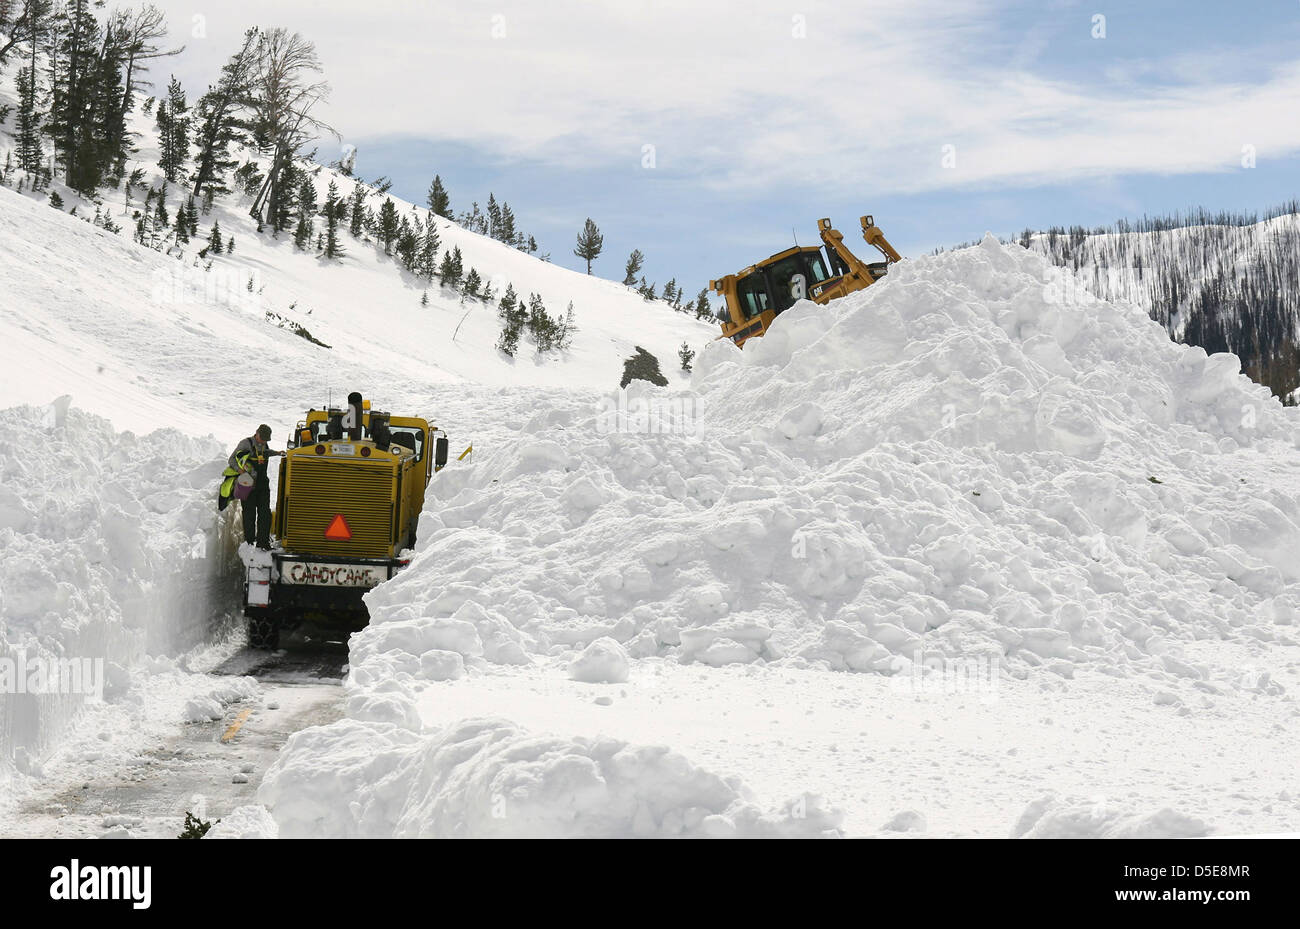 Snow plows clear mountains of snow from the Sylvan Pass in Absaroka Mountain Range Yellowstone National Park April 14, 2008 in Wyoming. Stock Photo